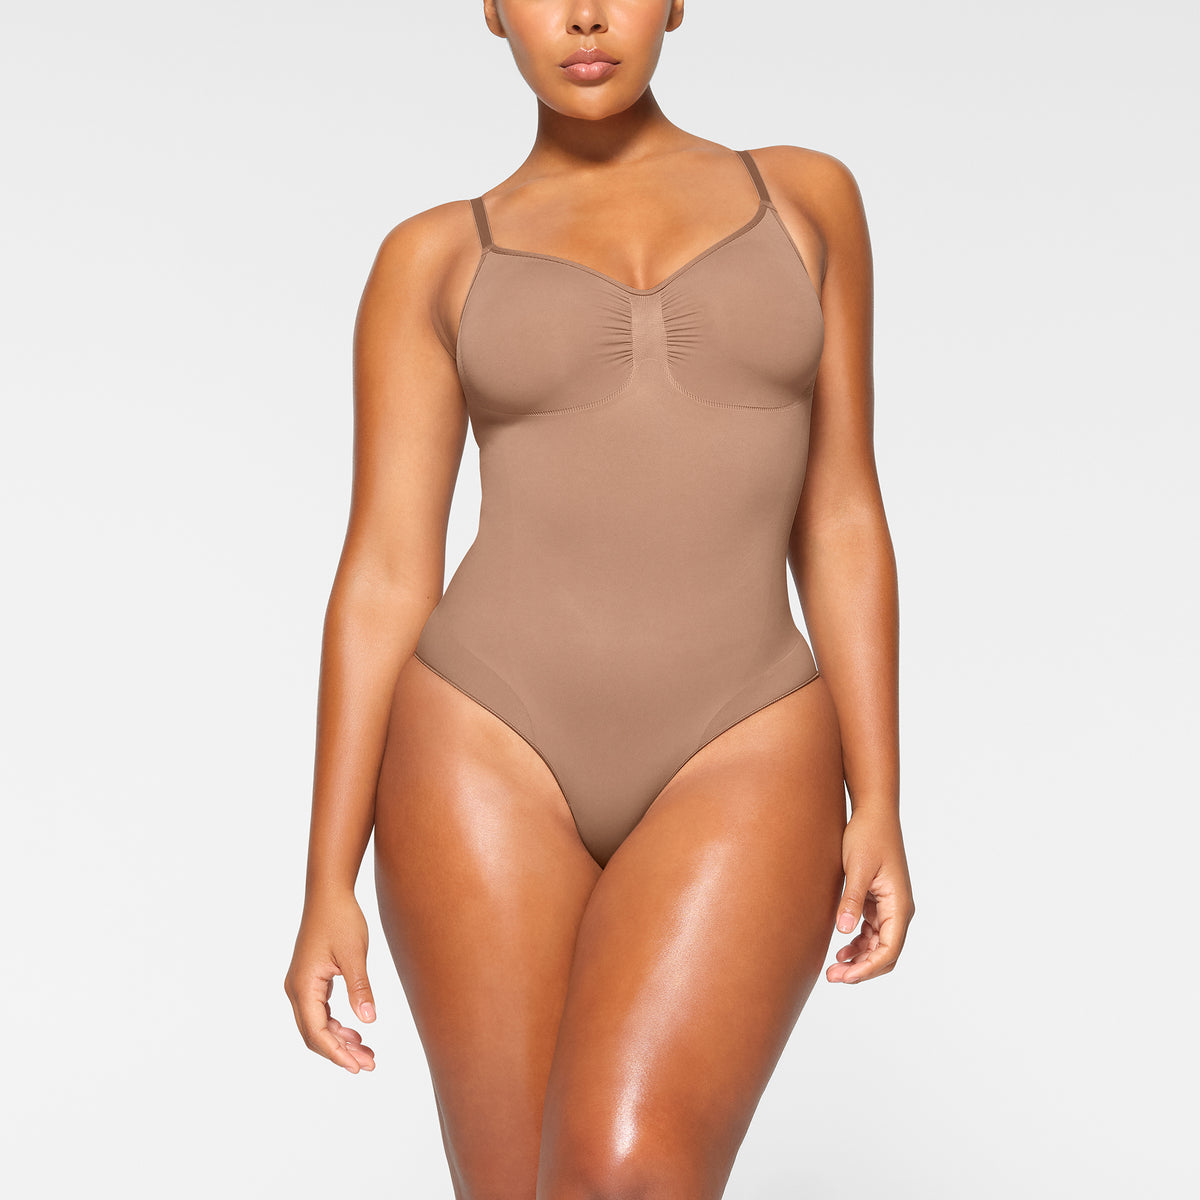 Private label seamless shapewear manufacturer